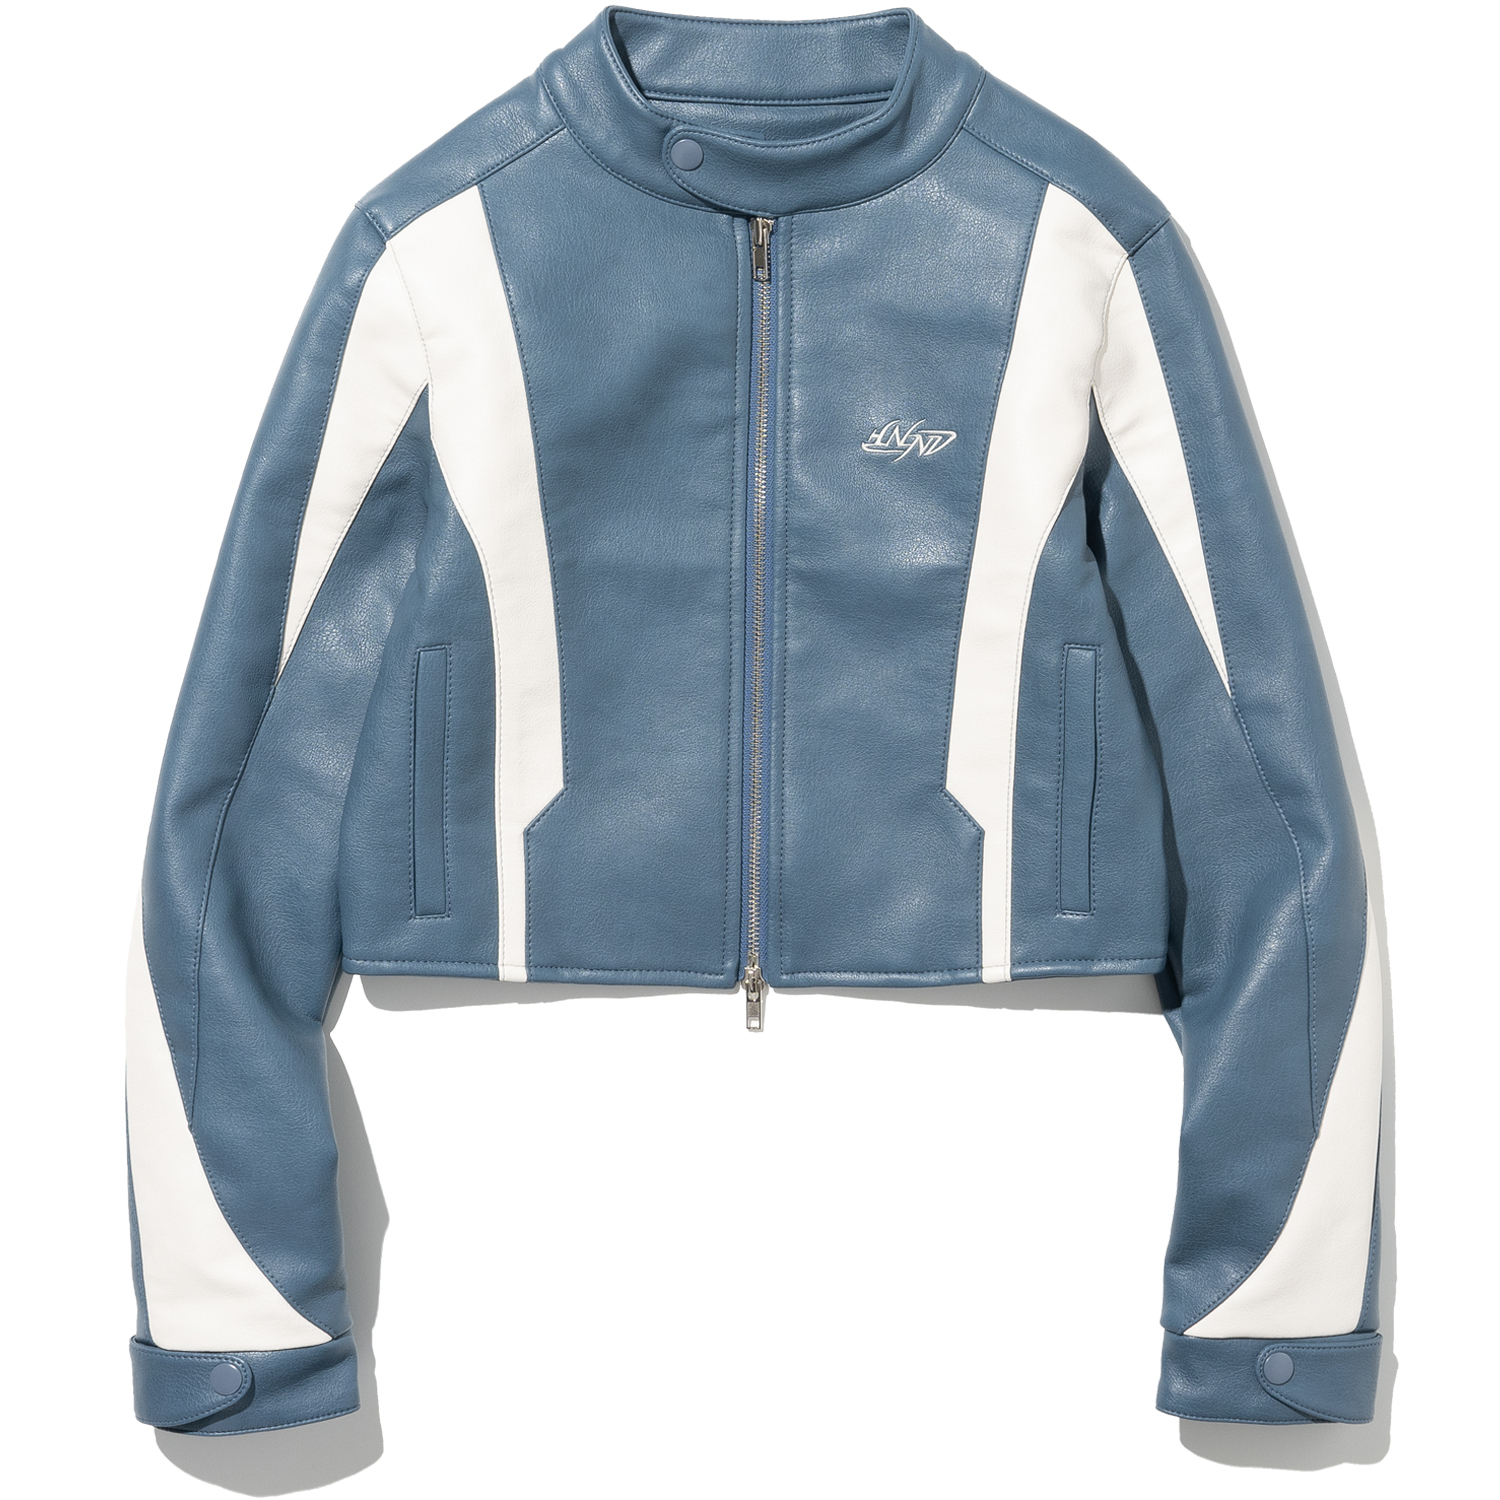 W Incision Leather Jacket - Blue,NOT4NERD